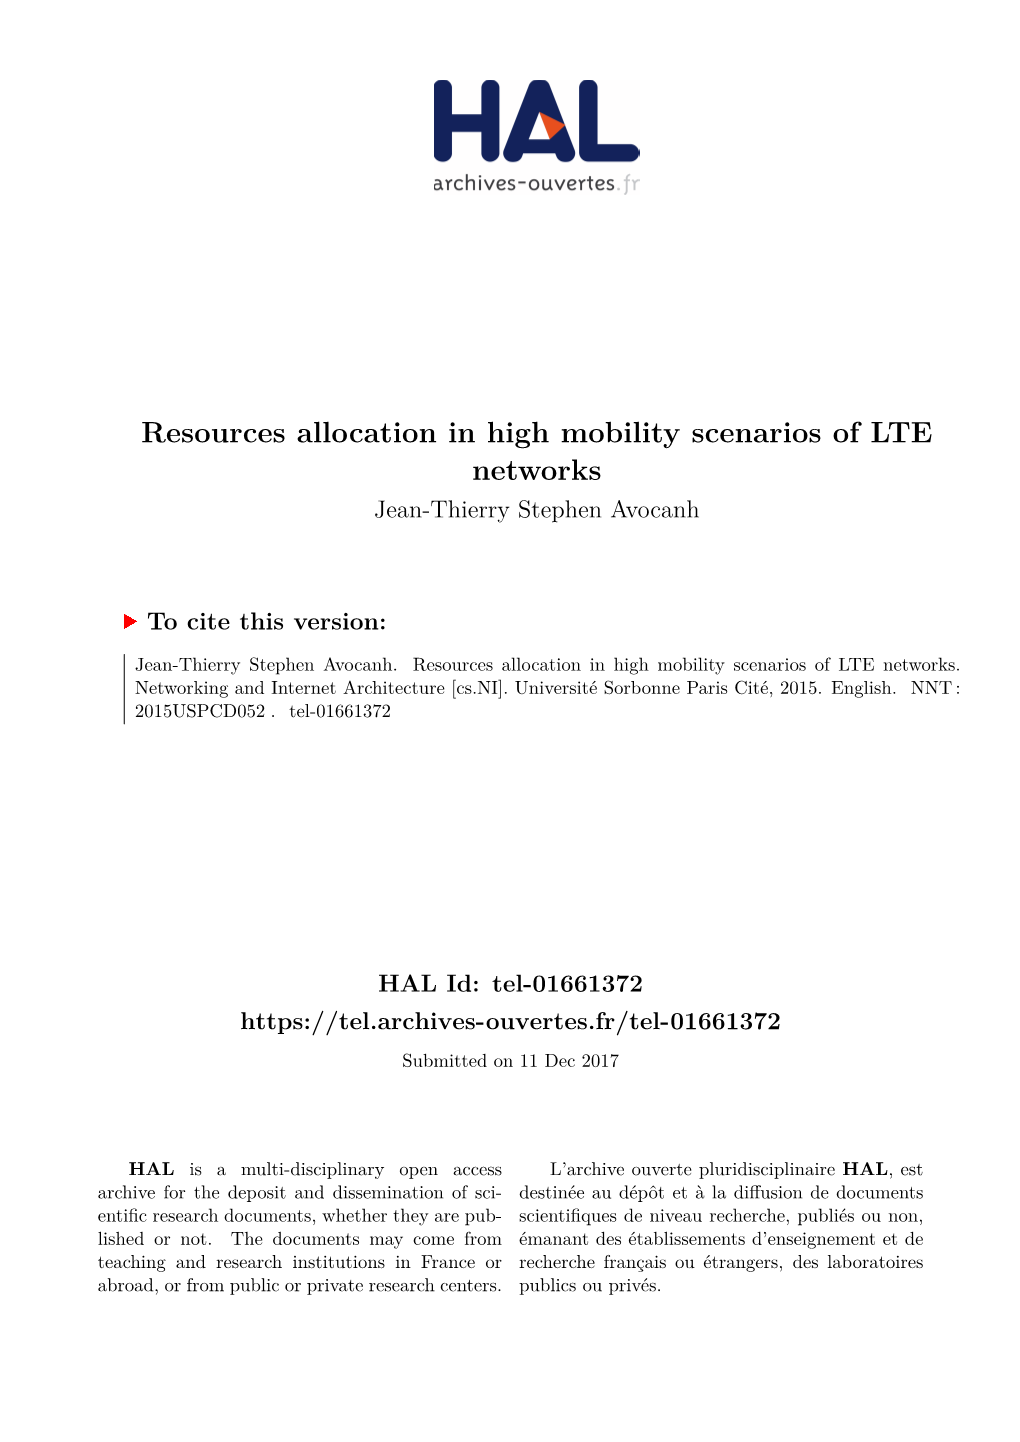 Resources Allocation in High Mobility Scenarios of LTE Networks Jean-Thierry Stephen Avocanh